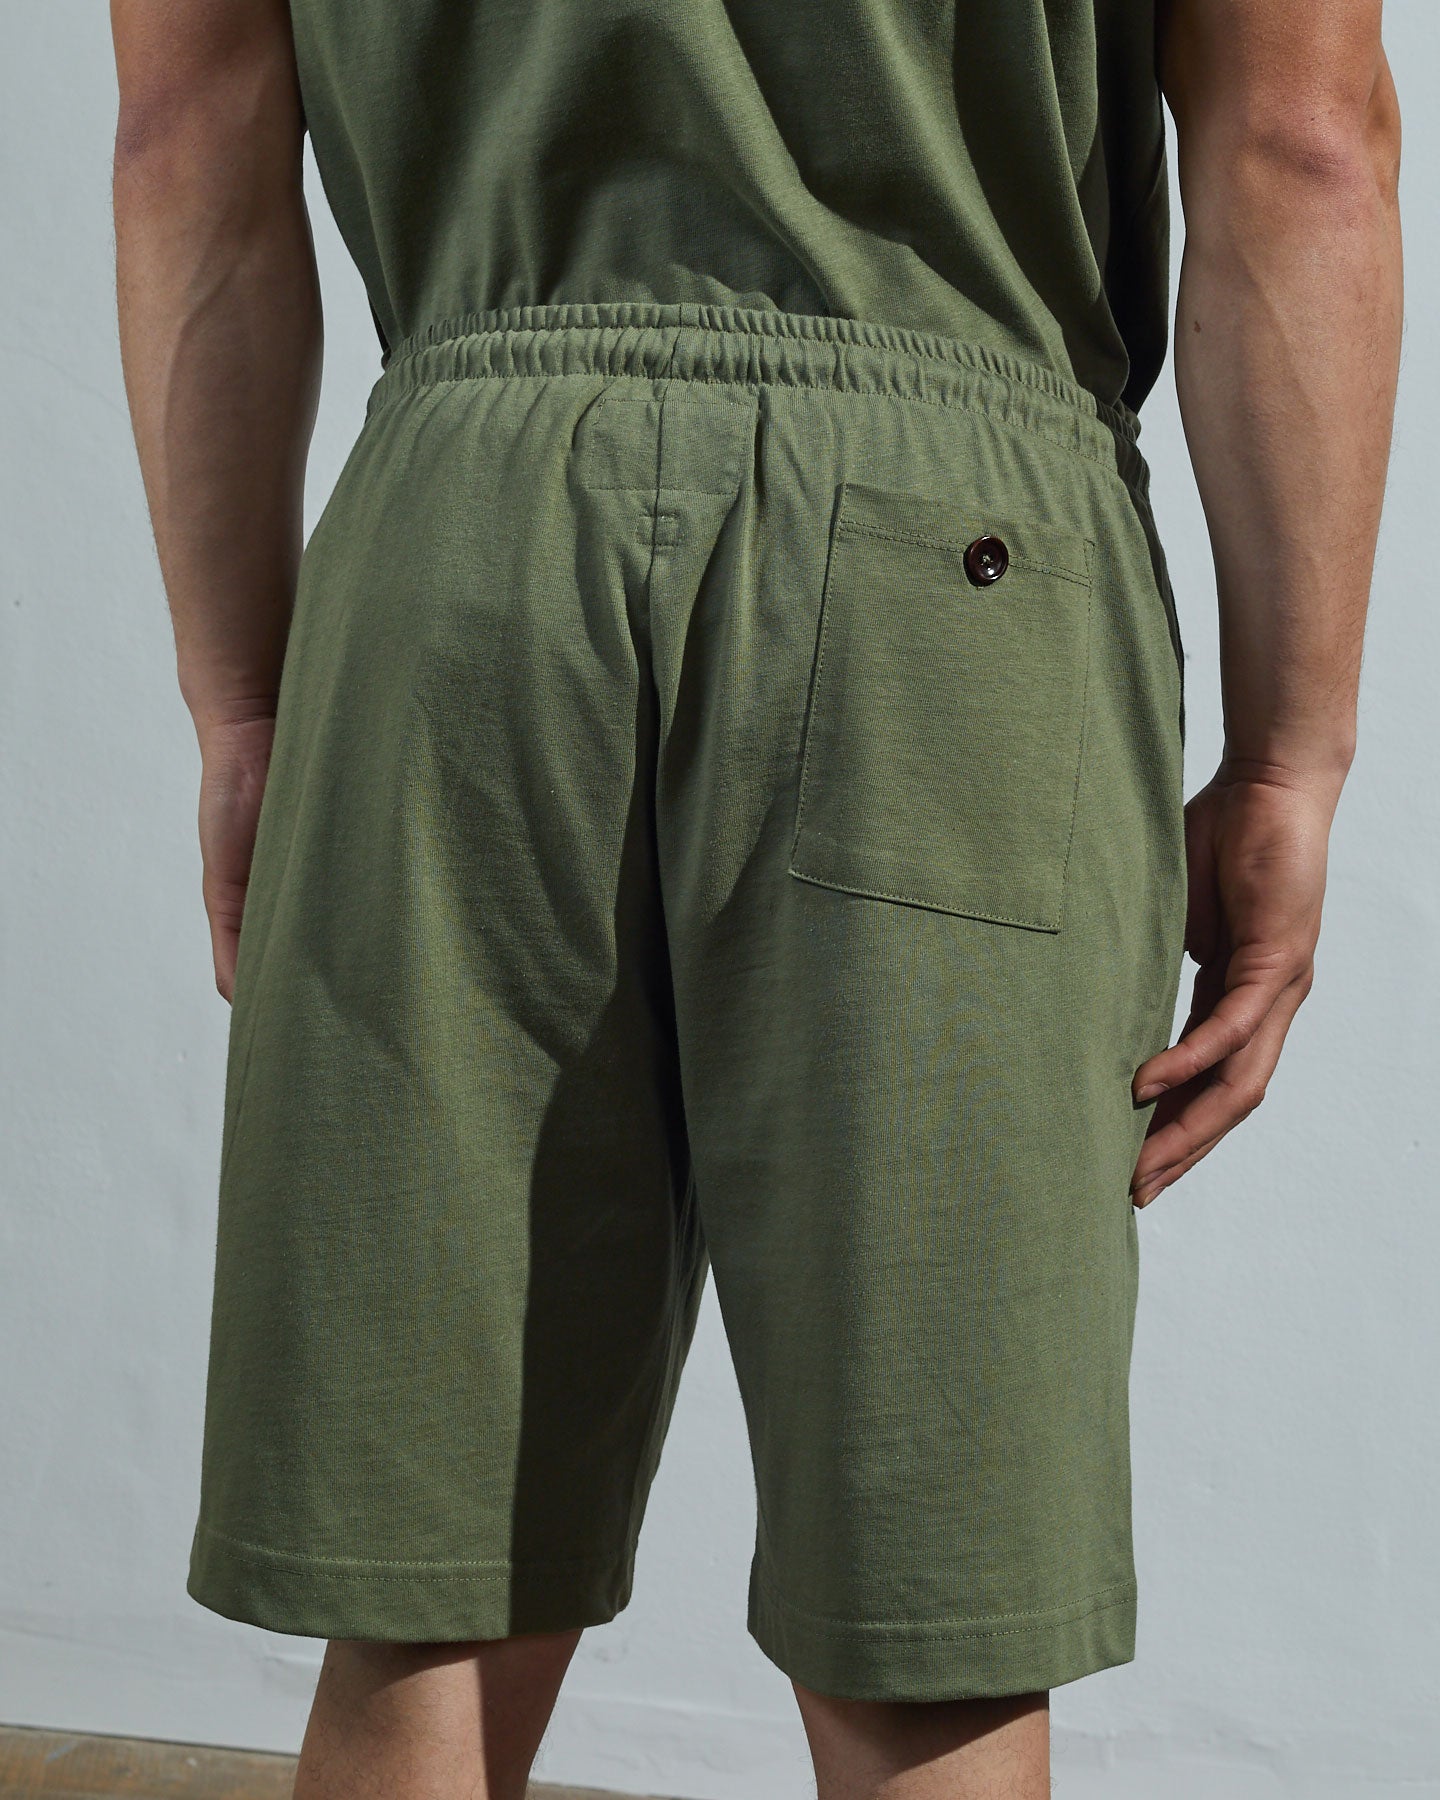 Back view of model wearing army green, relaxed cut organic cotton #7007 jersey shorts by Uskees with focus on back pocket with corozo button.